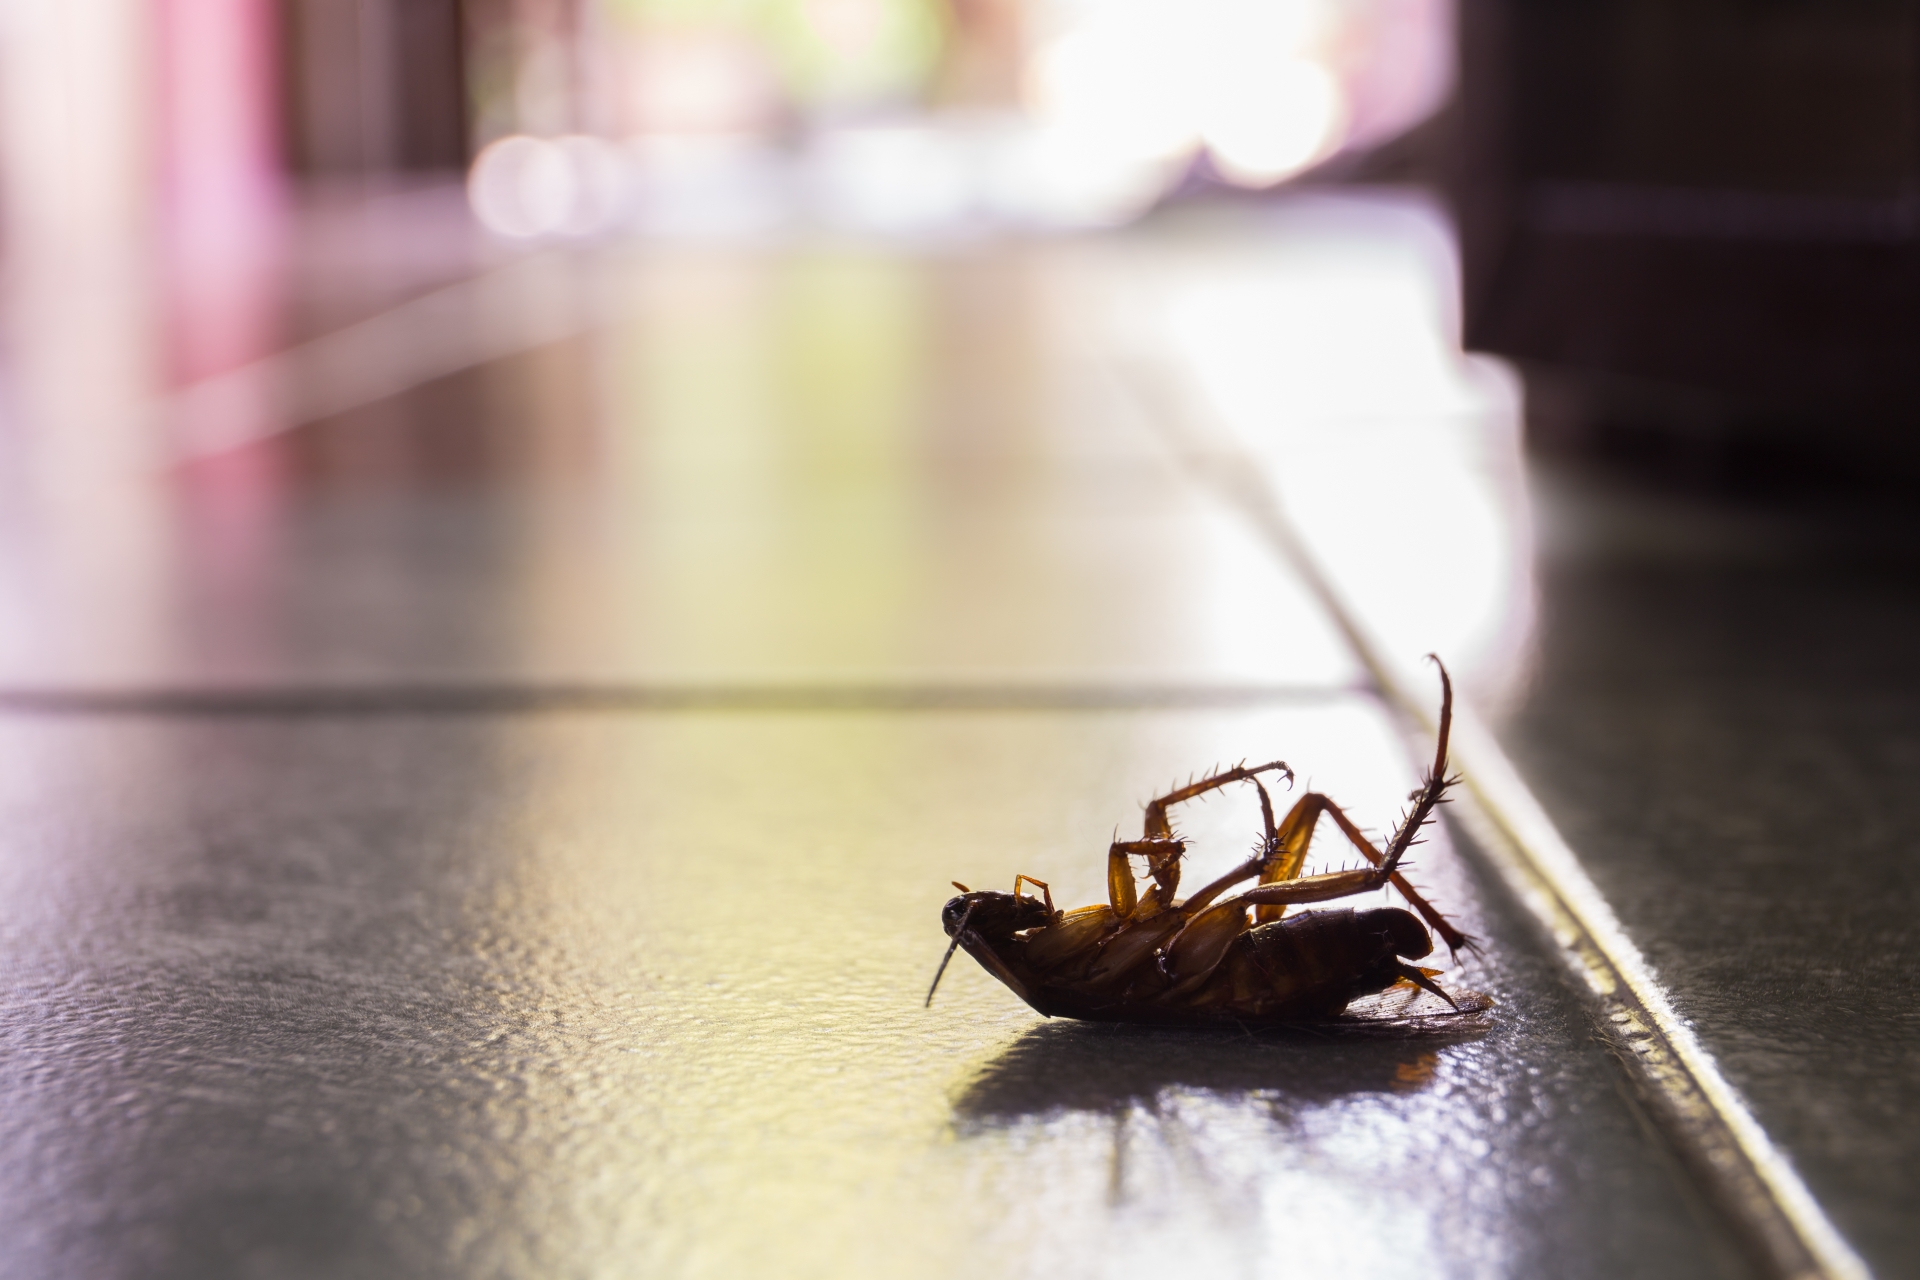 Cockroach Control, Pest Control in Bromley, Bickley, Downham, BR1. Call Now 020 8166 9746